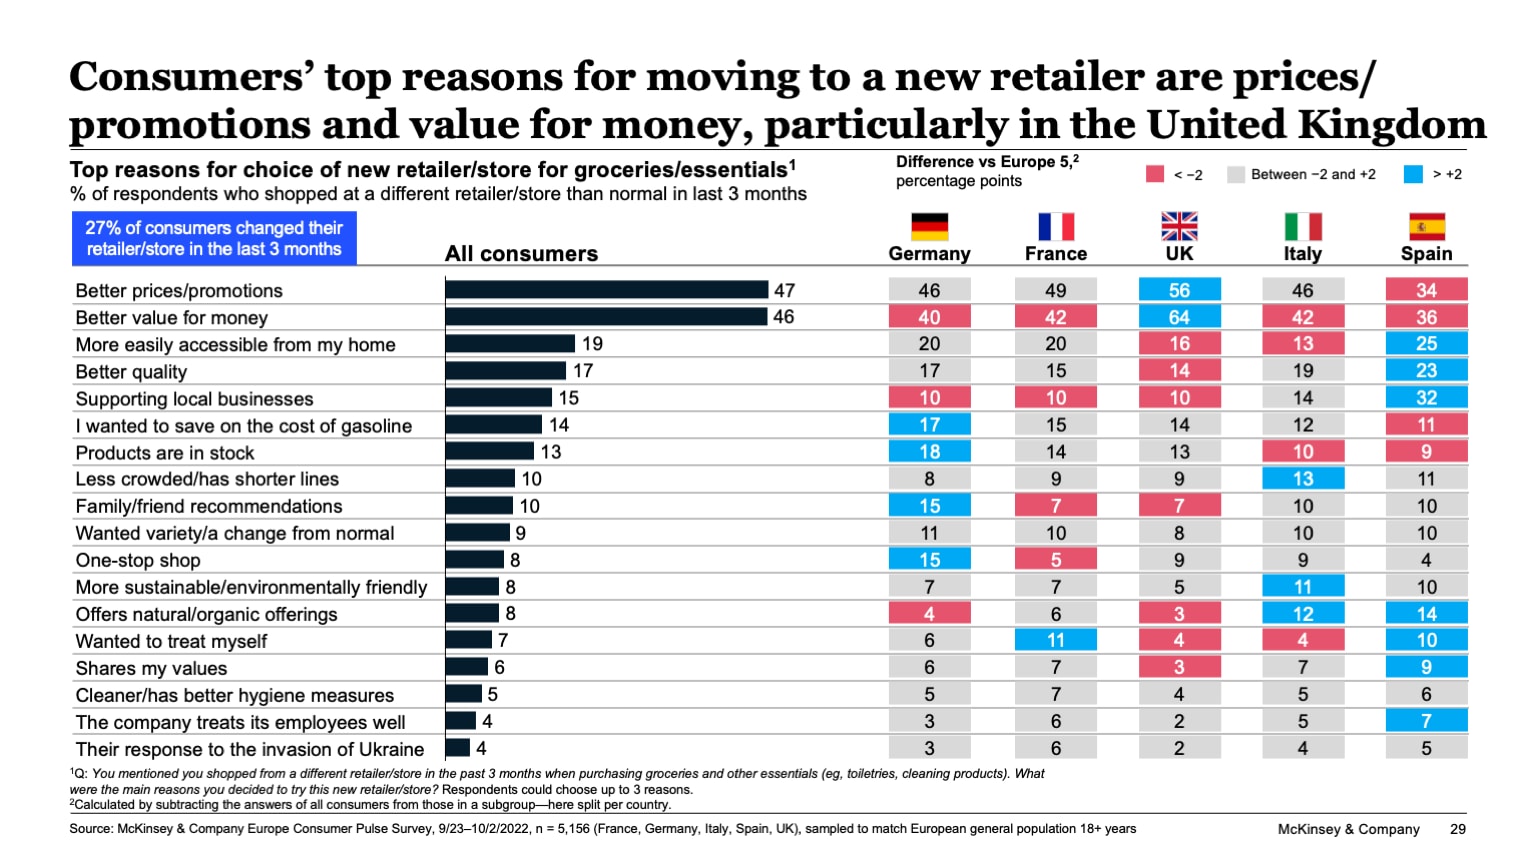 Consumers' top reasons for moving to a new retailer are prices/promotions and value for money, particularly in the United Kingdom